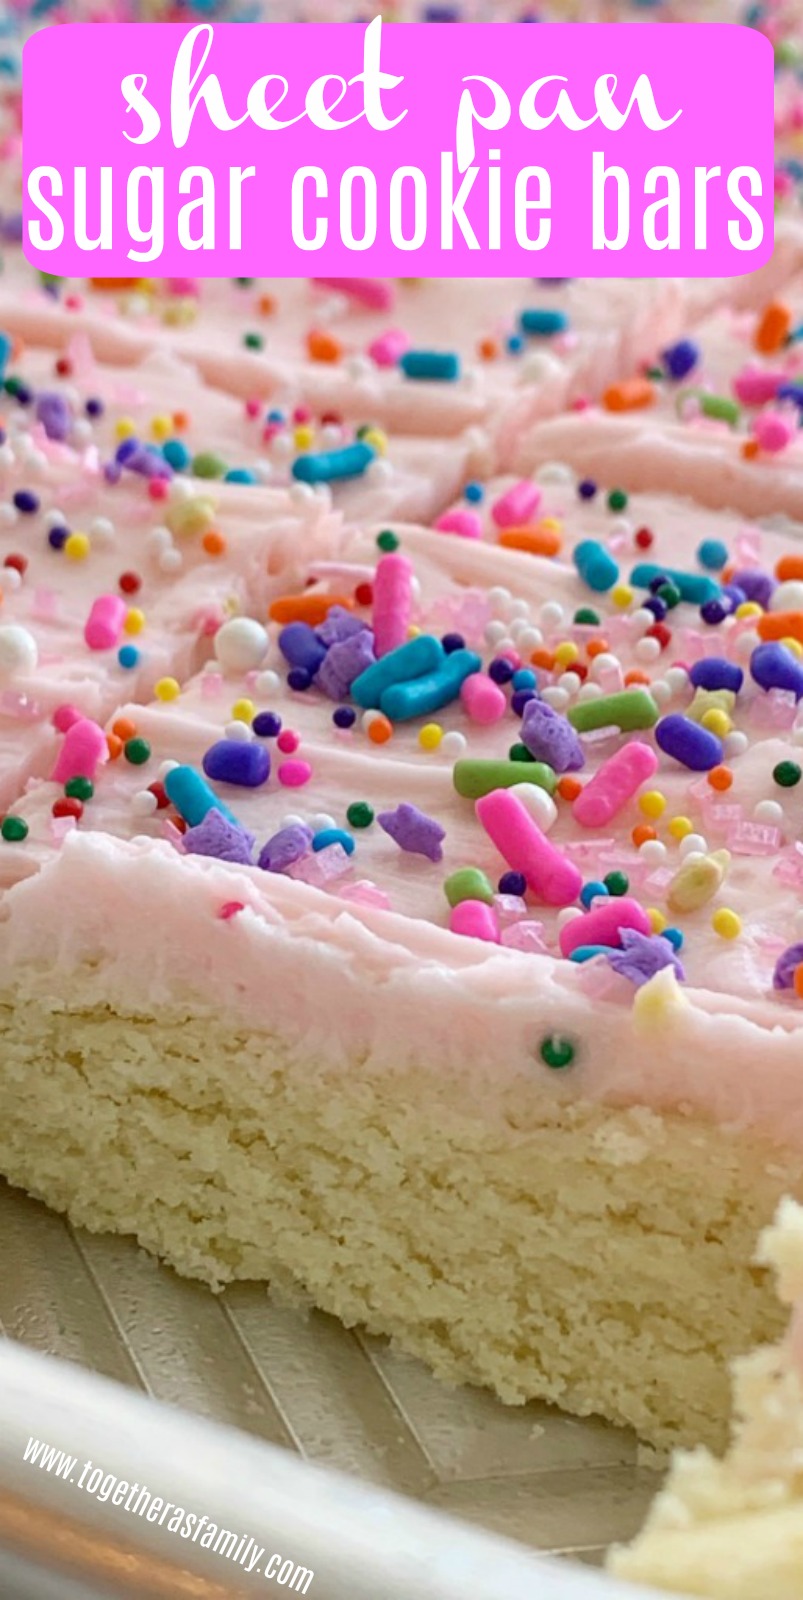 Sugar Cookie Bars | Sheet Pan Sugar Cookie Bars | Sugar Cookie Bars with Cream Cheese Frosting | Sugar Cookie Bars | Sugar Cookie Bars are thick, soft-baked and topped with the best cream cheese frosting! Sugar cookie bars bake in a cookie sheet so there is plenty serve a crowd. Change up the frosting color and sprinkles for any event or Holiday. #sugarcookies #sugarcookiebars #christmasbaking #holidayrecipes #recipeoftheday #dessertrecipes